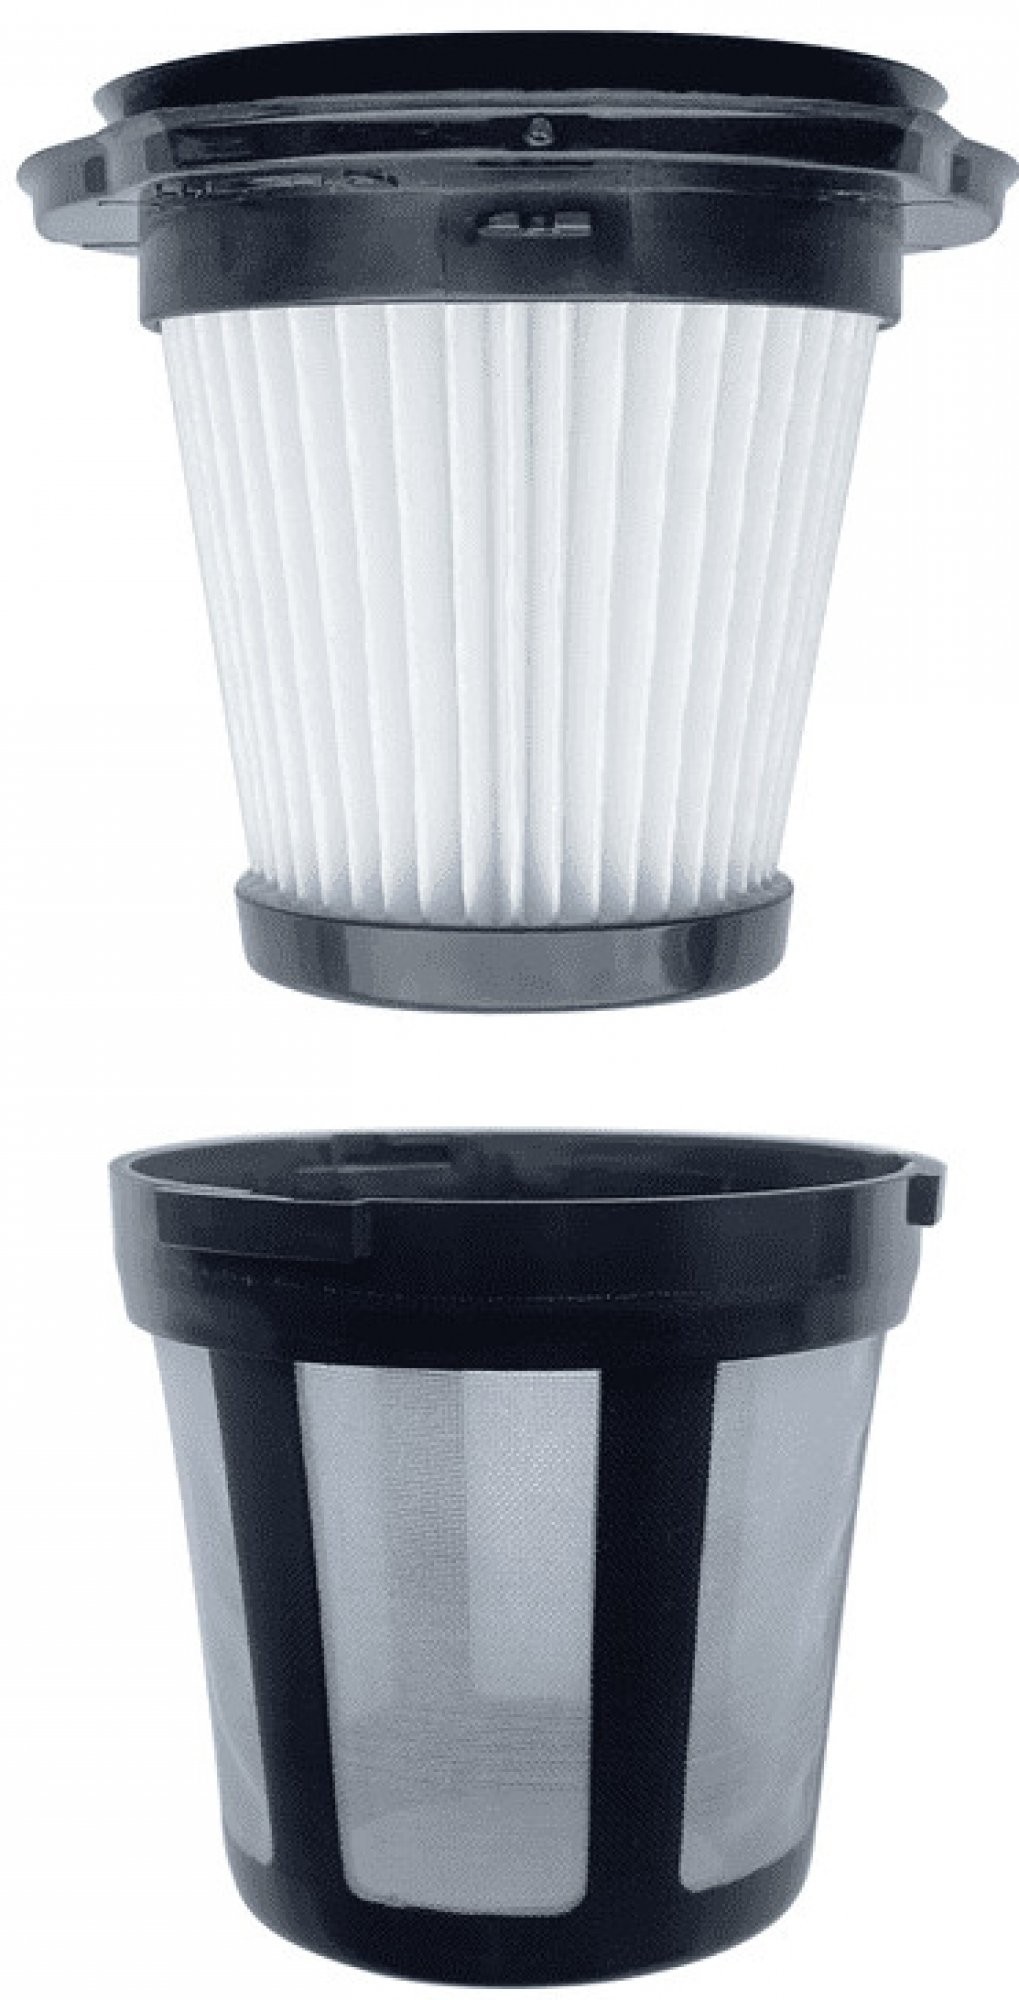 BISSELL filter pre FeatherWeight 3387